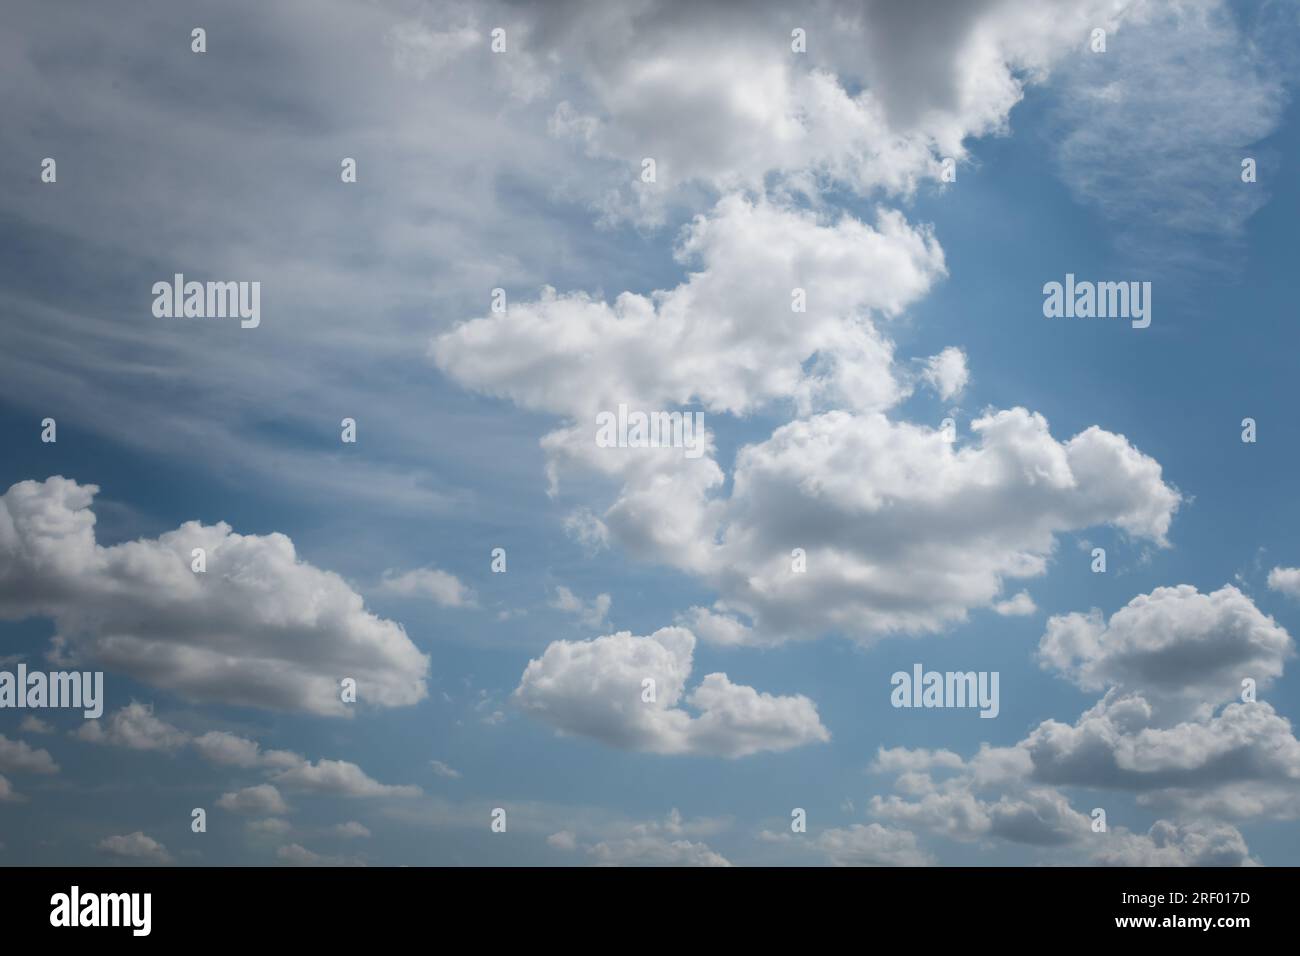 Clouds in the sky during a sudden change in weather Stock Photo